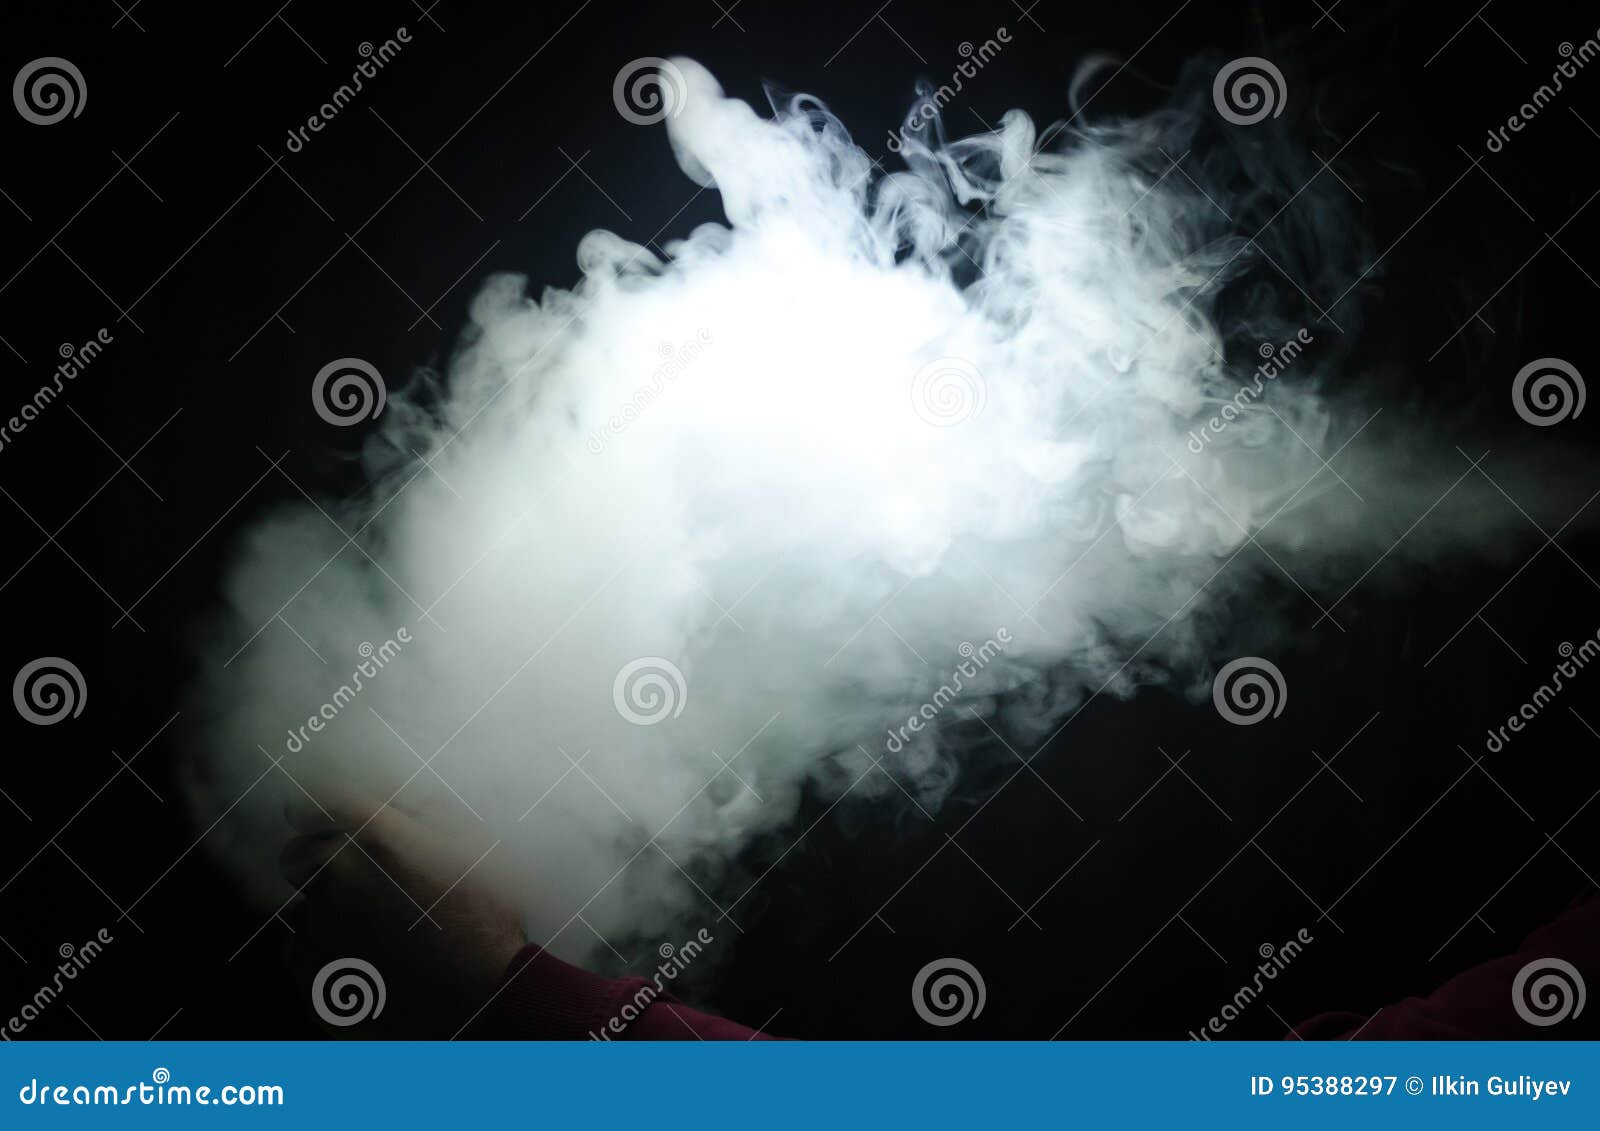 vaping man holding a mod. a cloud of vapor. black background. vaping an electronic cigarette with a lot of smoke